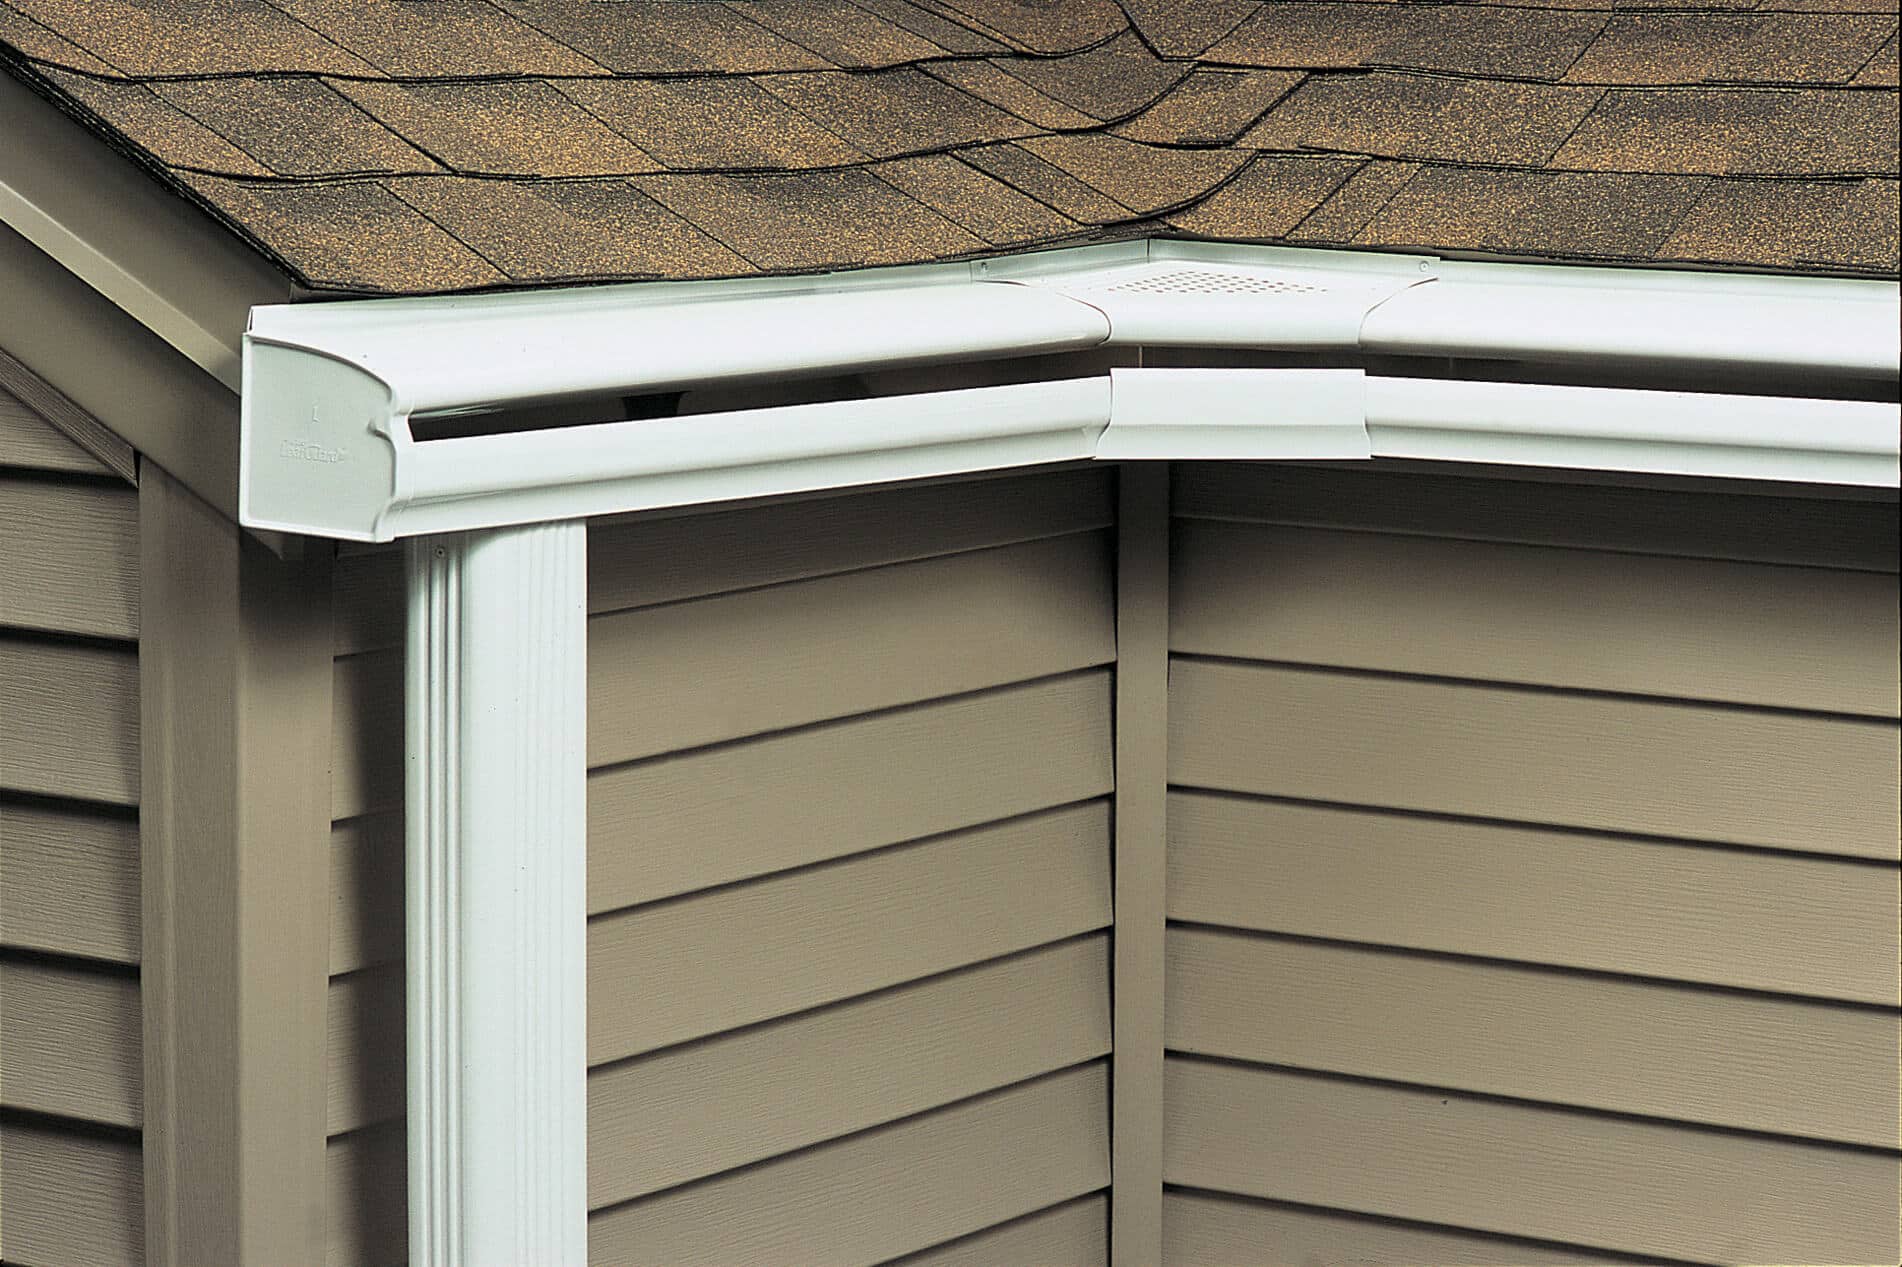 Picture of gutters installed on a house.